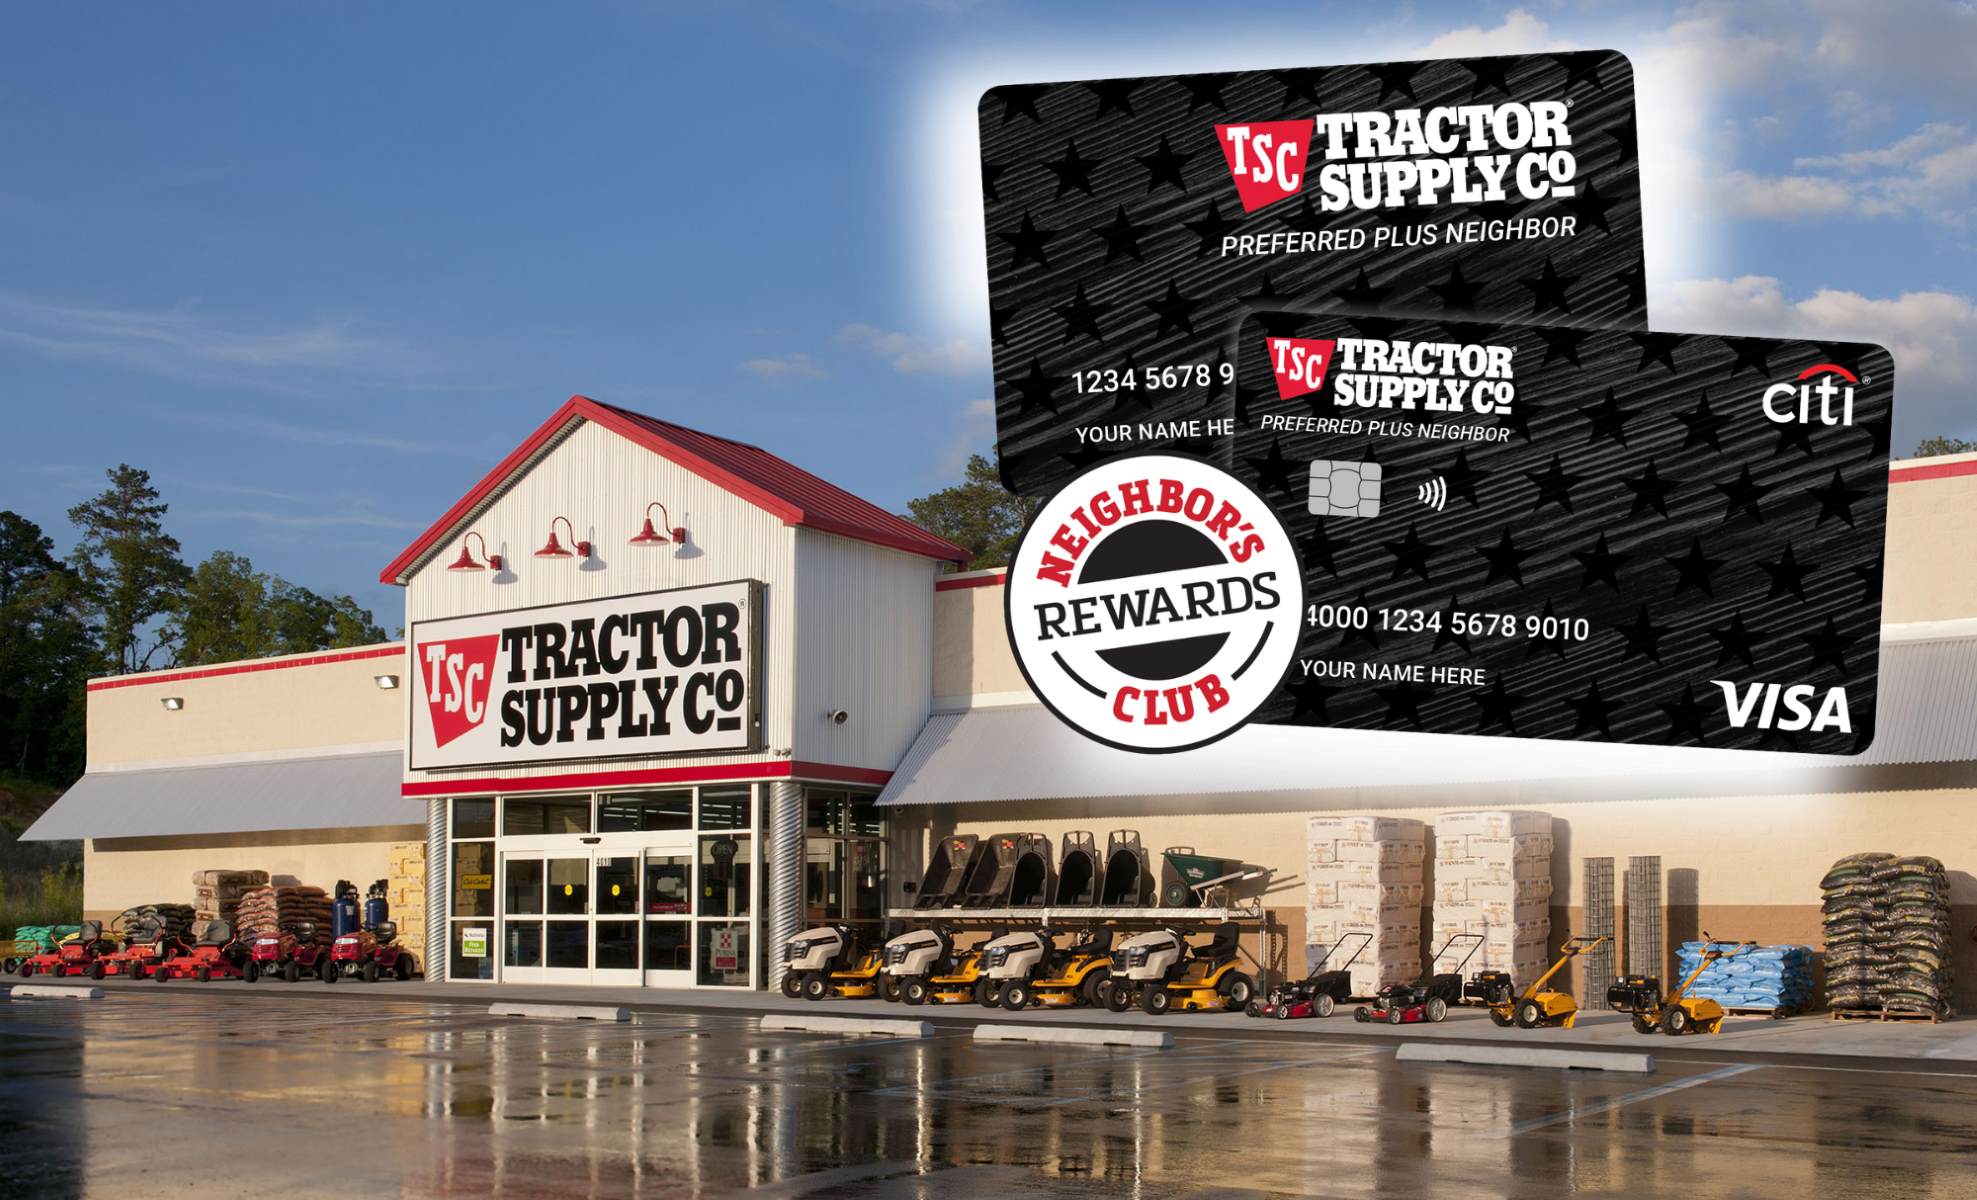 How Long Does It Take To Get Approved For A Tractor Supply Credit Card